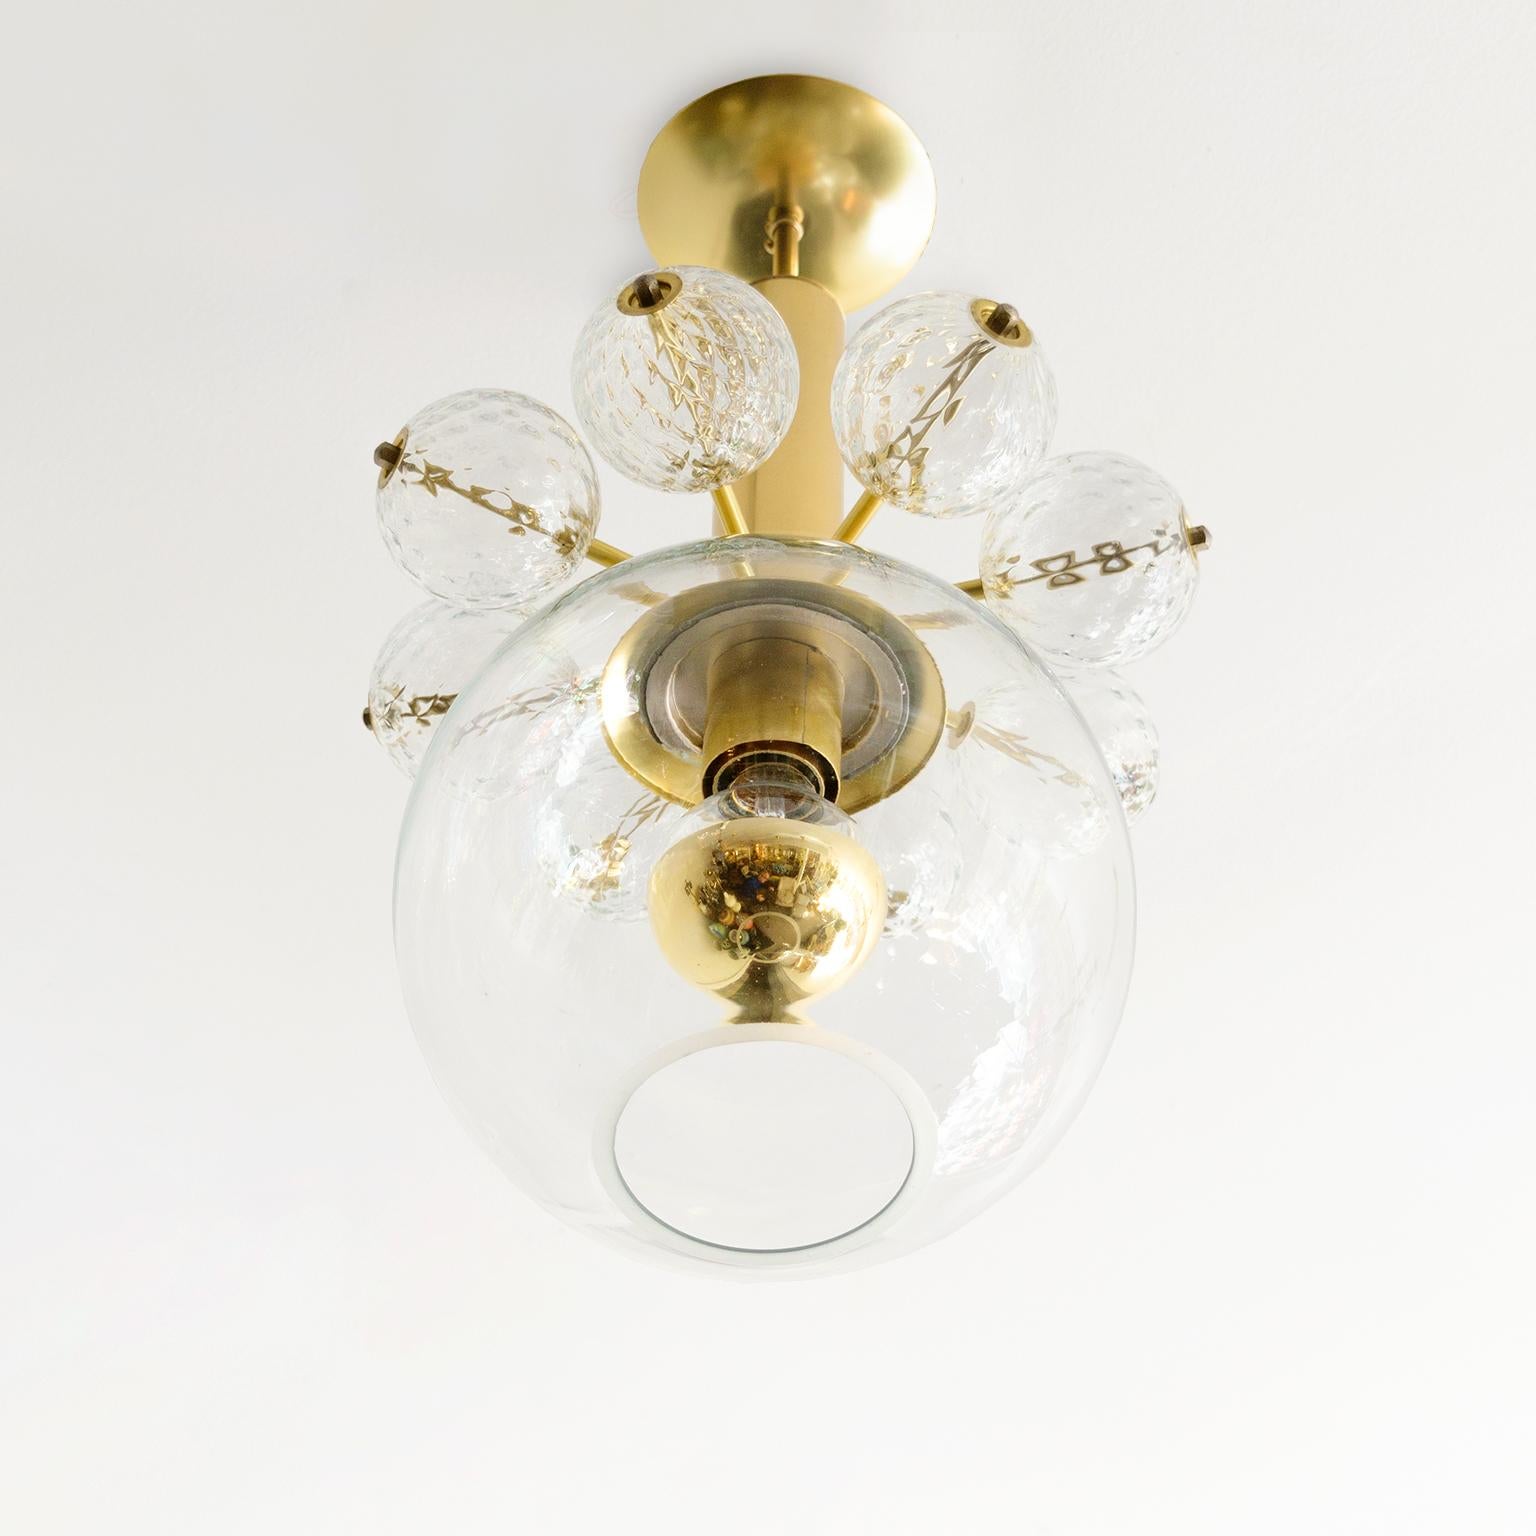 Kamenicky Senov, Czech Pendant with Hand Blown Glass on a Polished Brass Frame In Good Condition For Sale In New York, NY